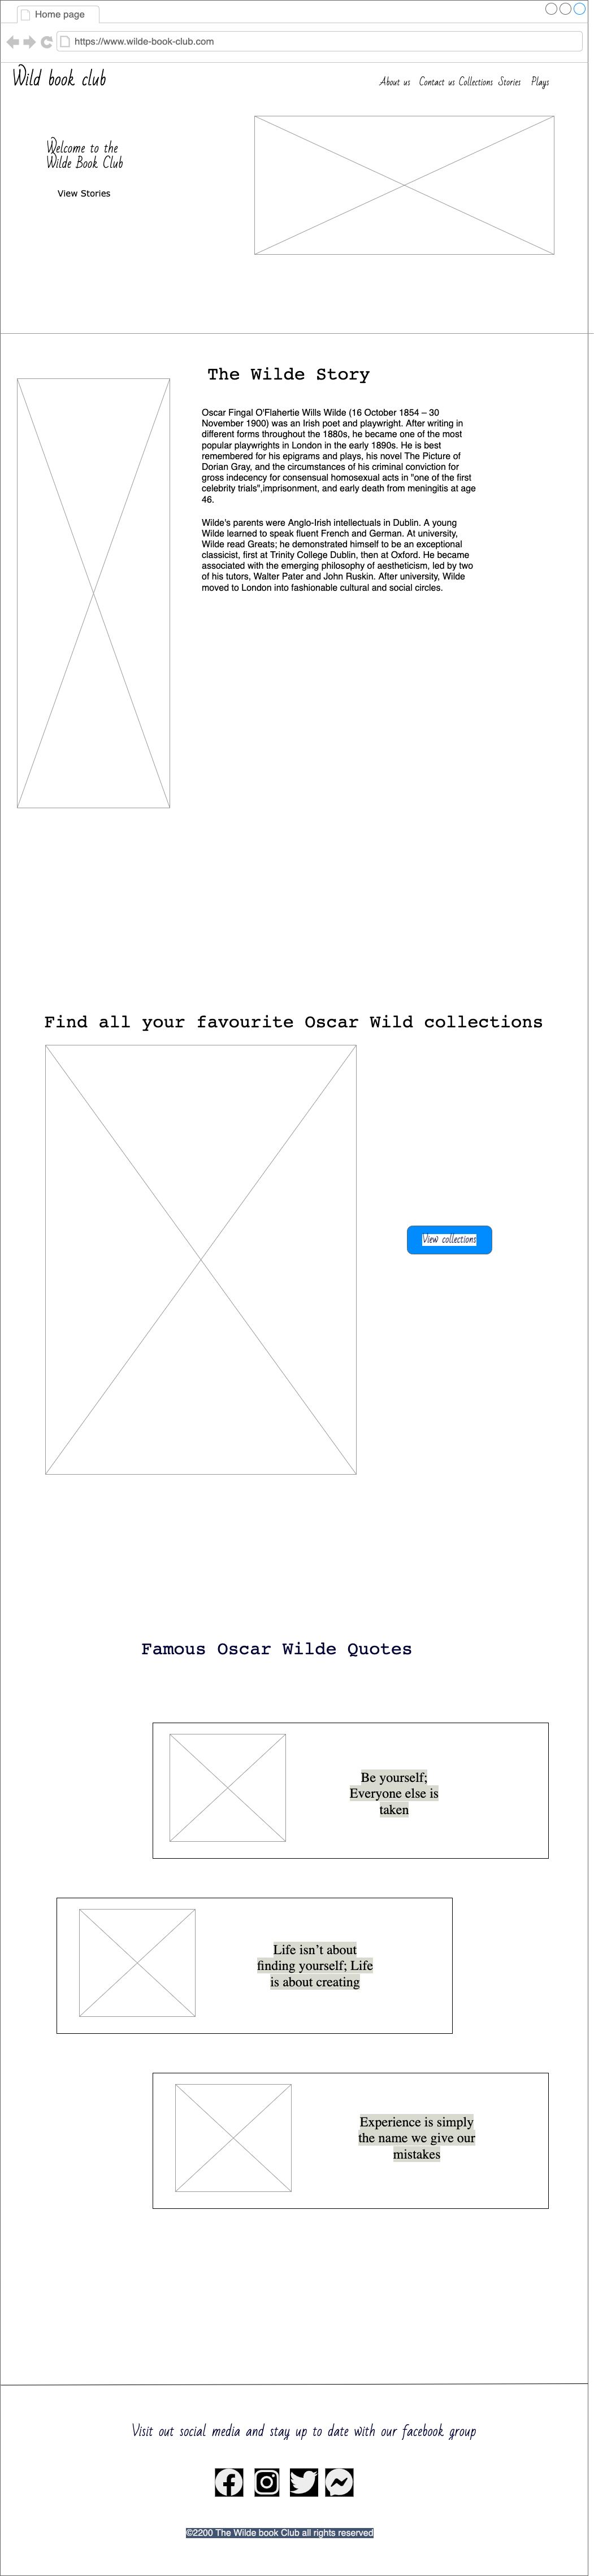 Collections page